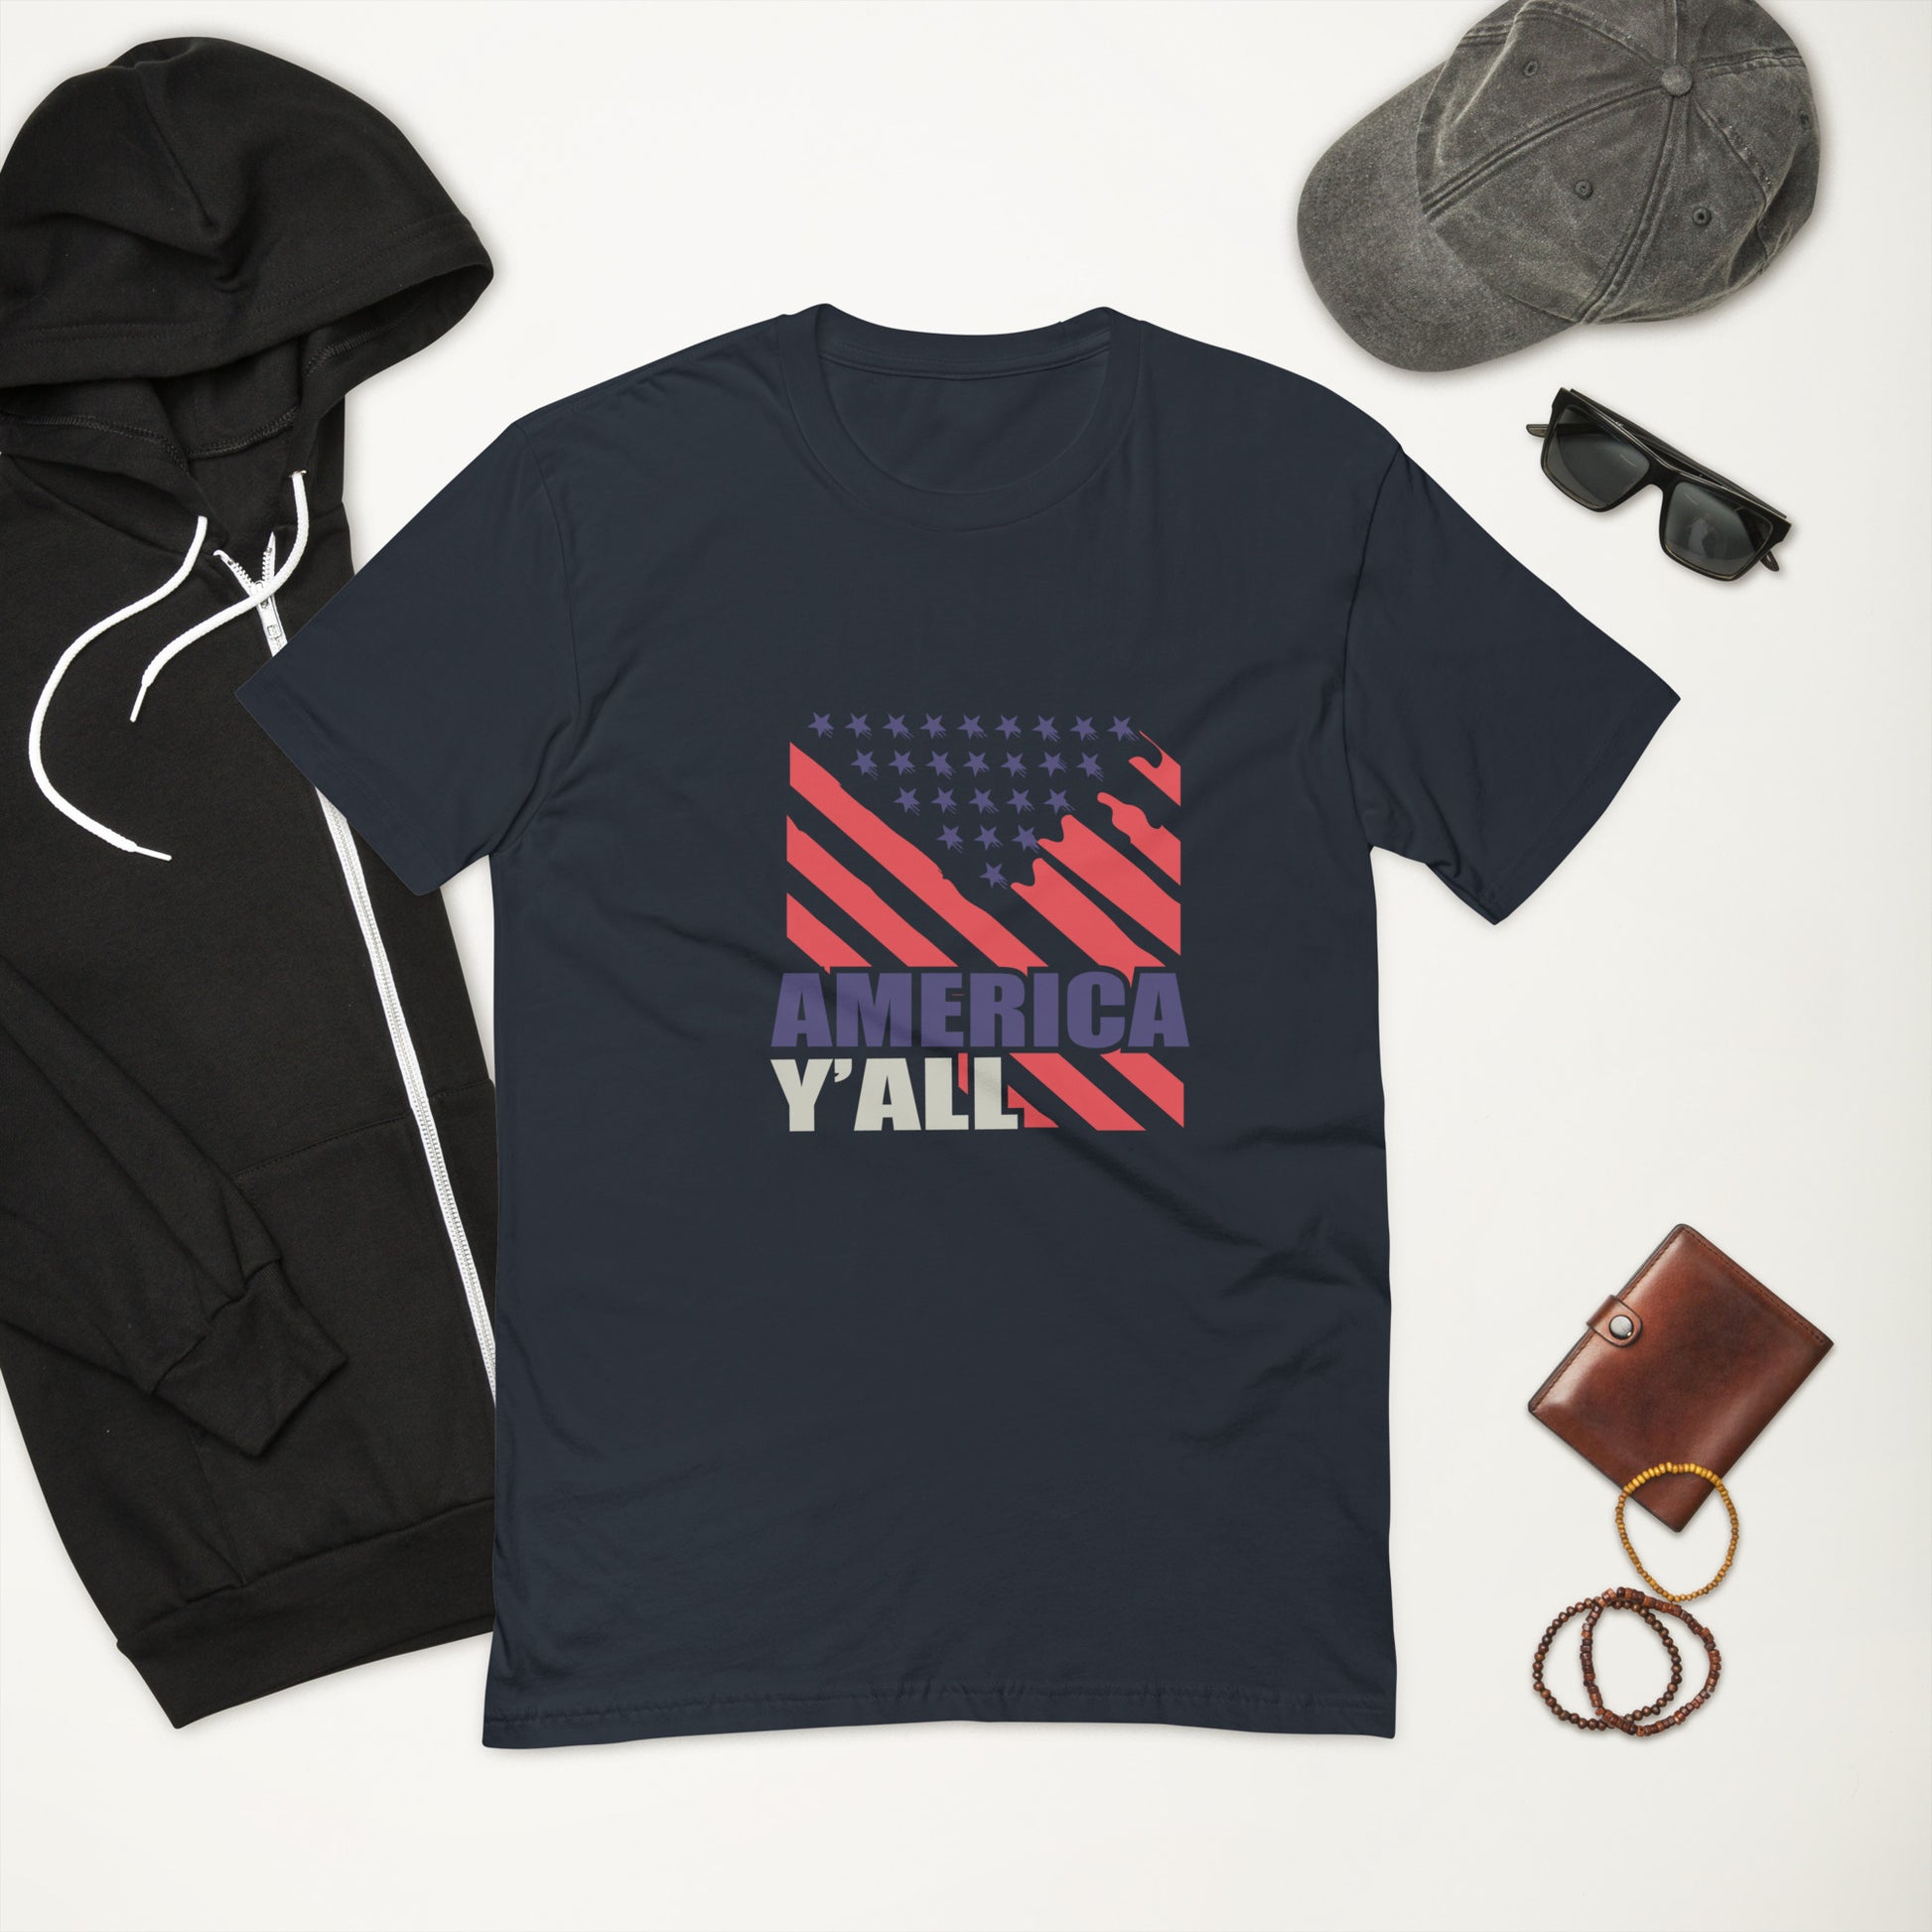 America Y'all Short Sleeve T-shirt - Midnight Navy / XS - Sport Finesse